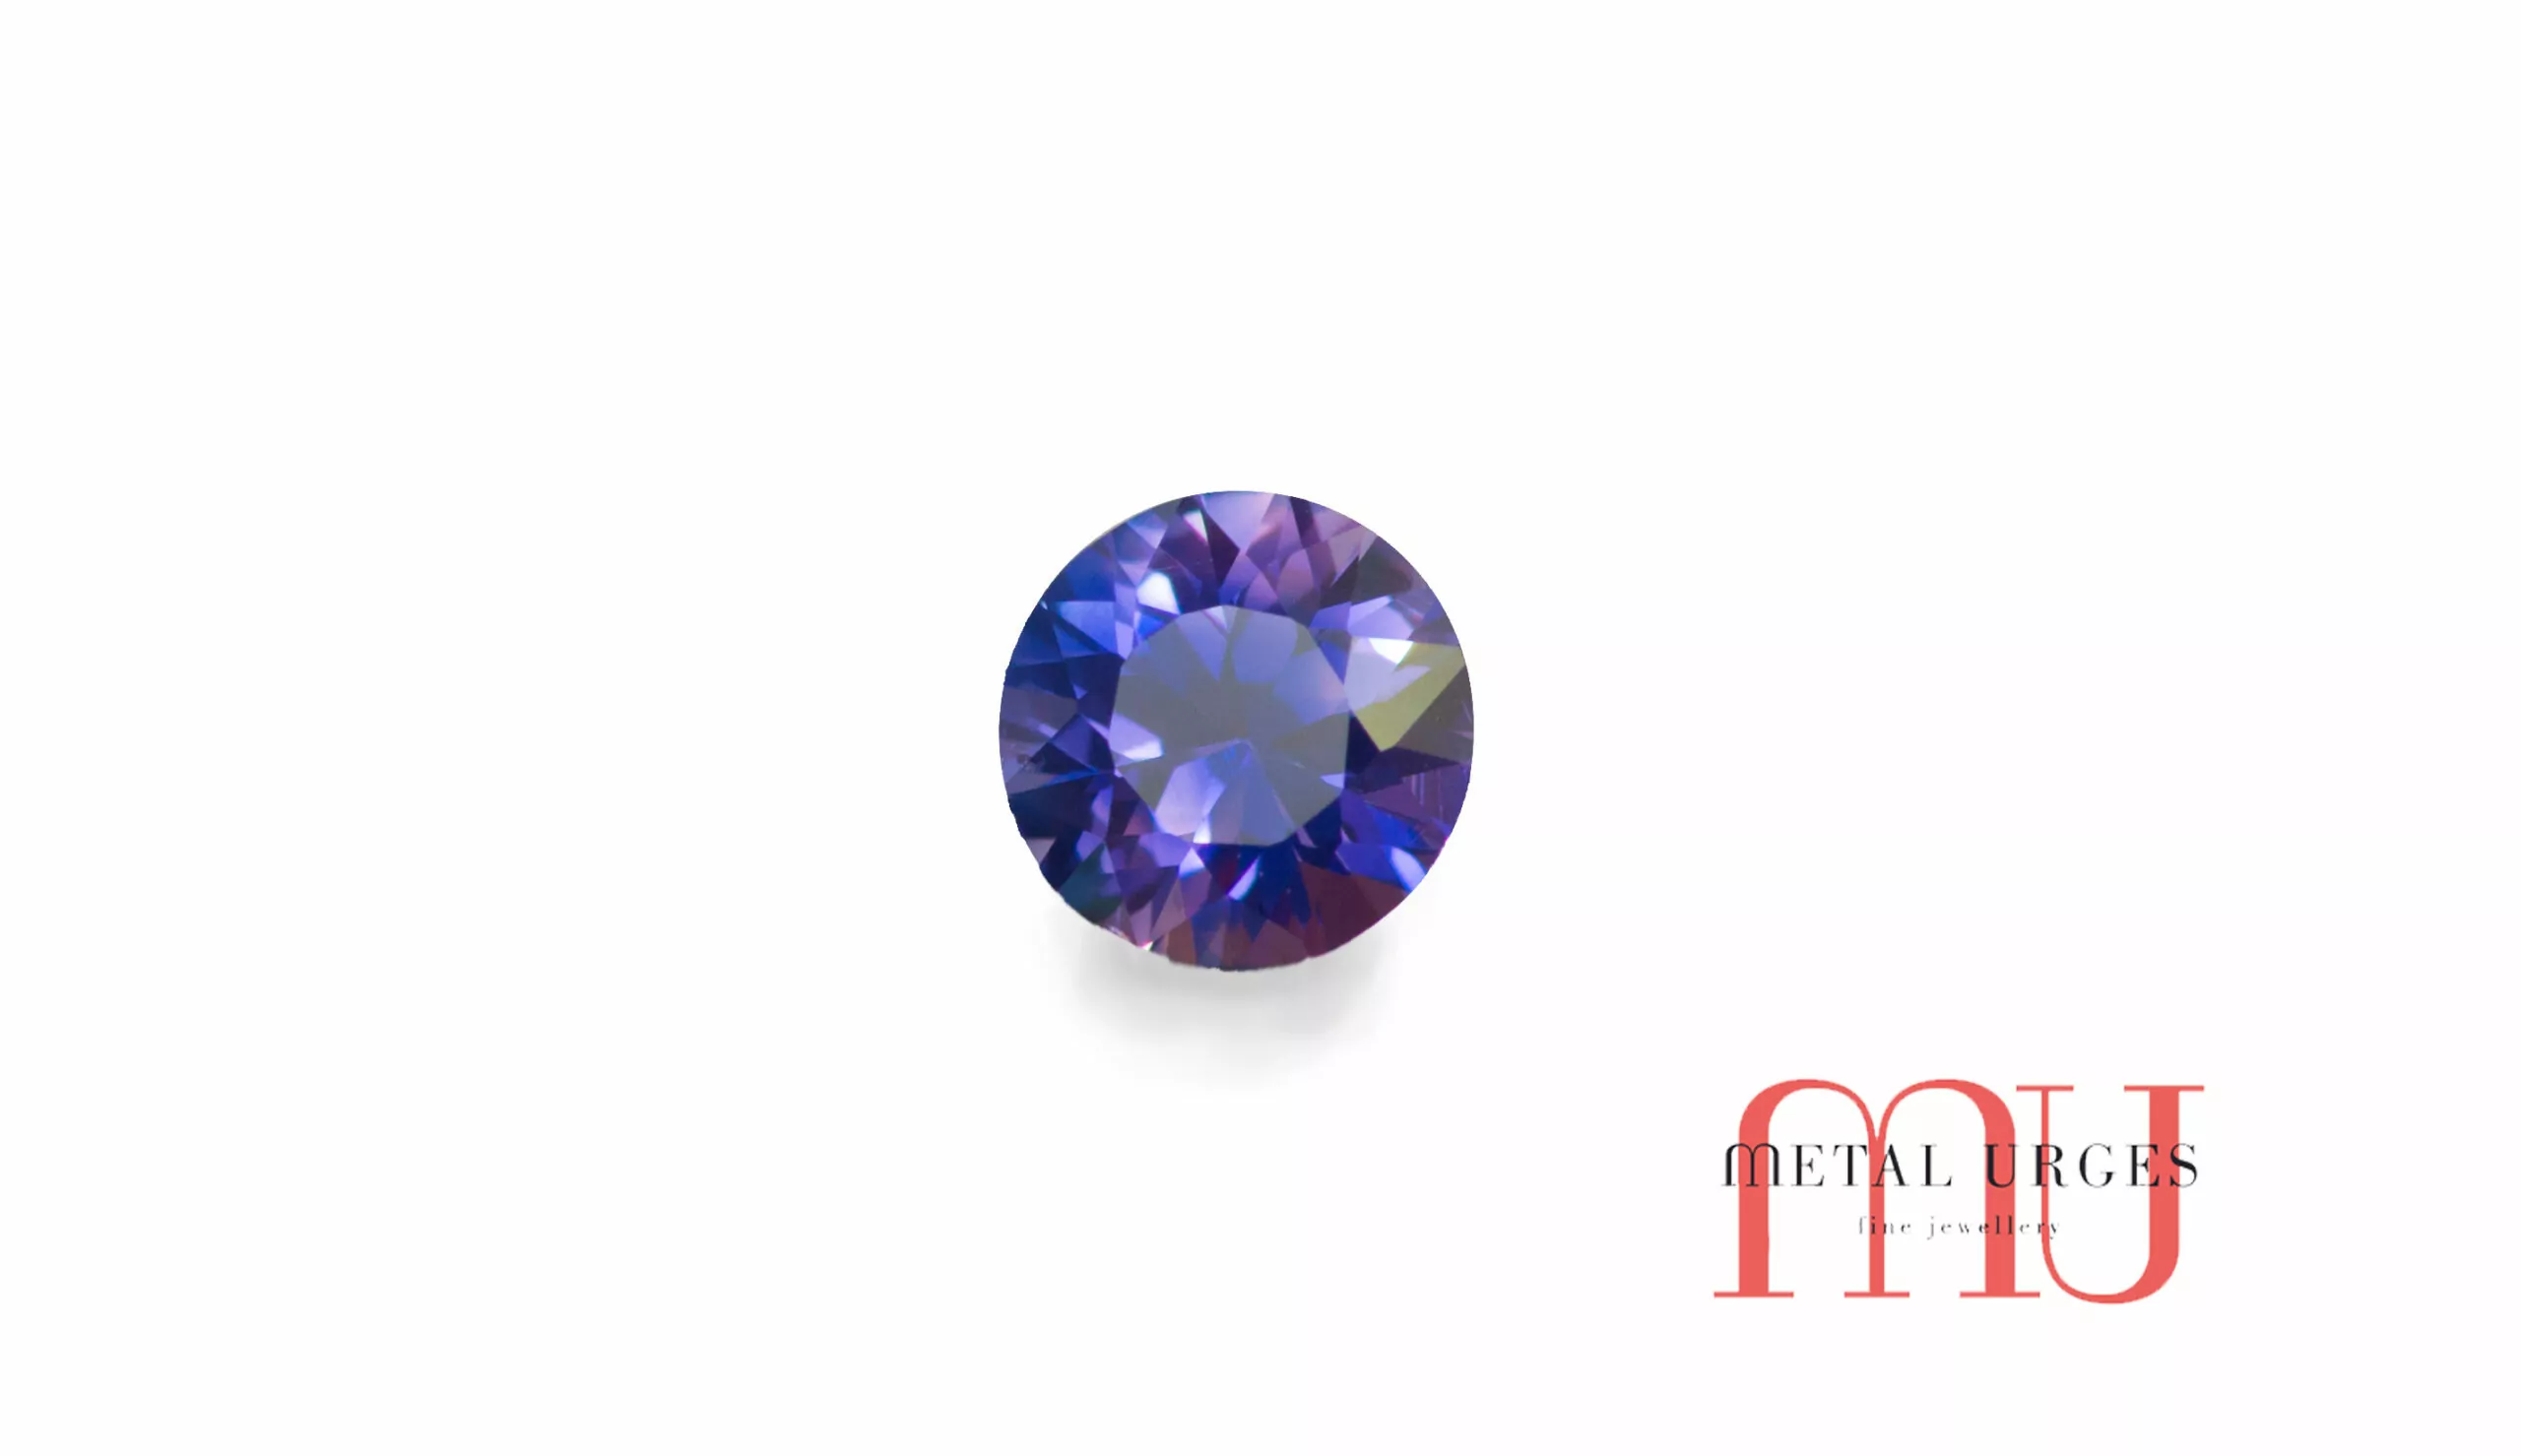 Sustainably sourced round cut purple sapphire